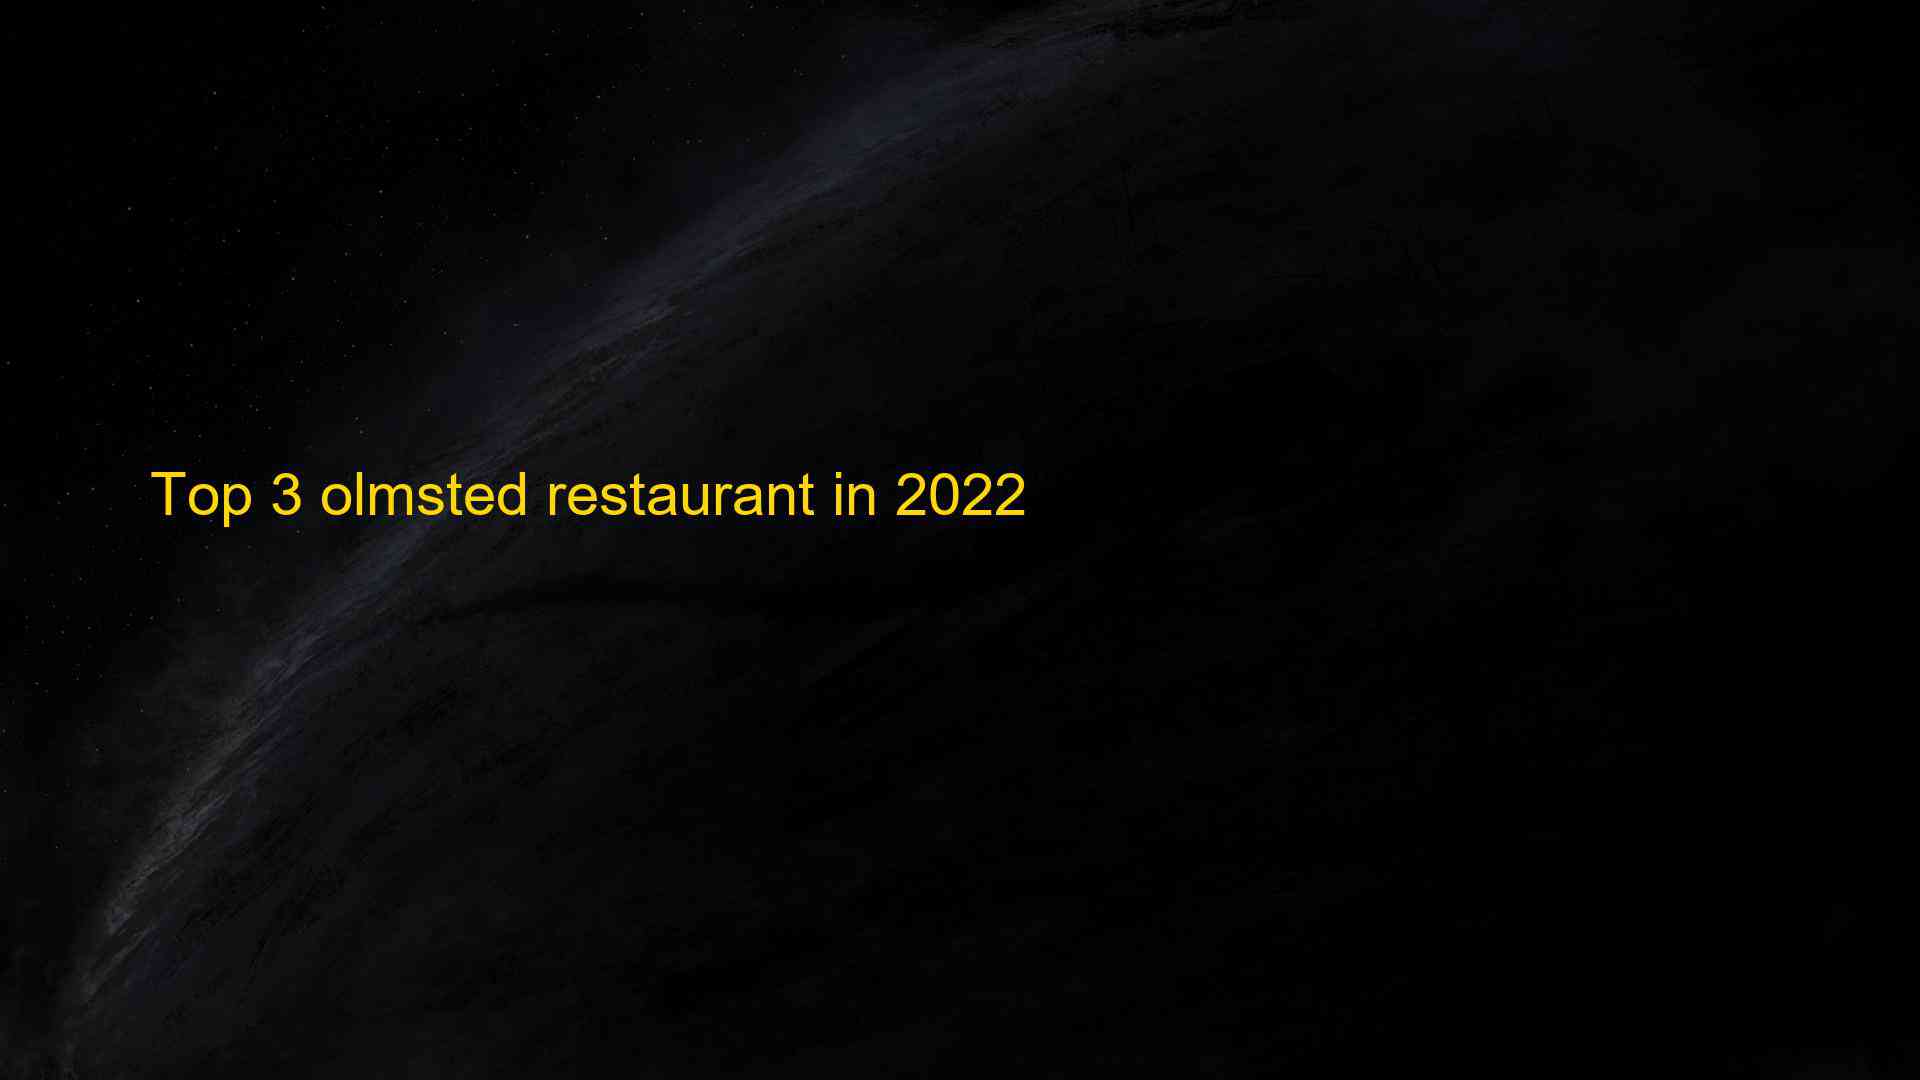 Top 3 olmsted restaurant in 2022 1662965002